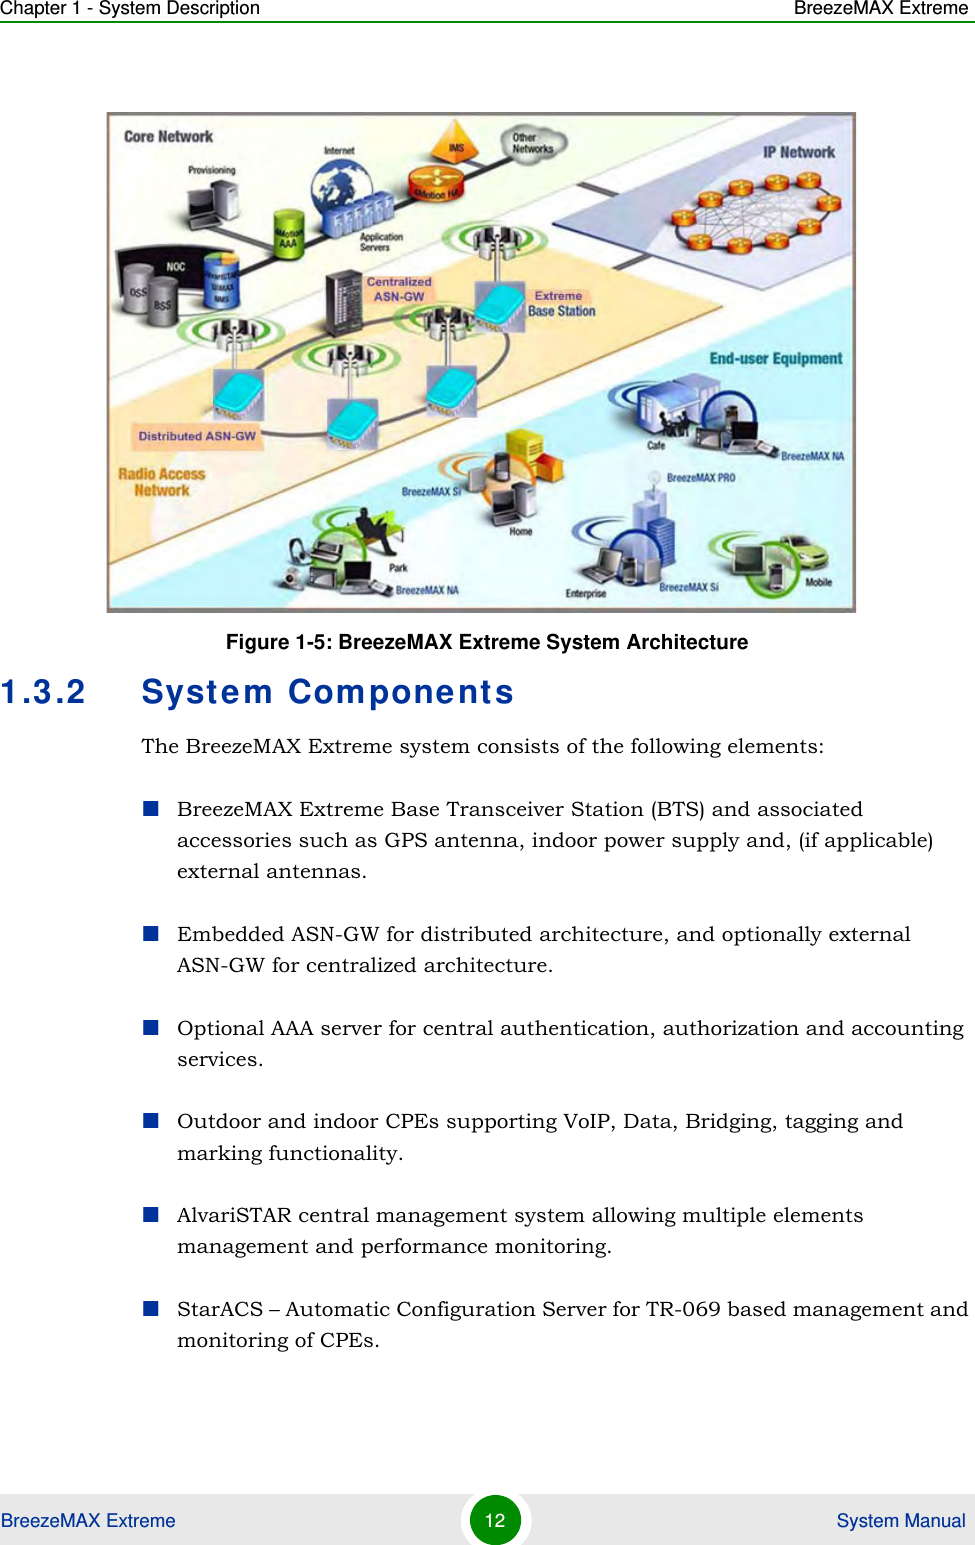 Chapter 1 - System Description BreezeMAX ExtremeBreezeMAX Extreme 12  System Manual1.3.2 System ComponentsThe BreezeMAX Extreme system consists of the following elements:BreezeMAX Extreme Base Transceiver Station (BTS) and associated accessories such as GPS antenna, indoor power supply and, (if applicable) external antennas.Embedded ASN-GW for distributed architecture, and optionally external ASN-GW for centralized architecture.Optional AAA server for central authentication, authorization and accounting services.Outdoor and indoor CPEs supporting VoIP, Data, Bridging, tagging and marking functionality.AlvariSTAR central management system allowing multiple elements management and performance monitoring.StarACS – Automatic Configuration Server for TR-069 based management and monitoring of CPEs. Figure 1-5: BreezeMAX Extreme System Architecture